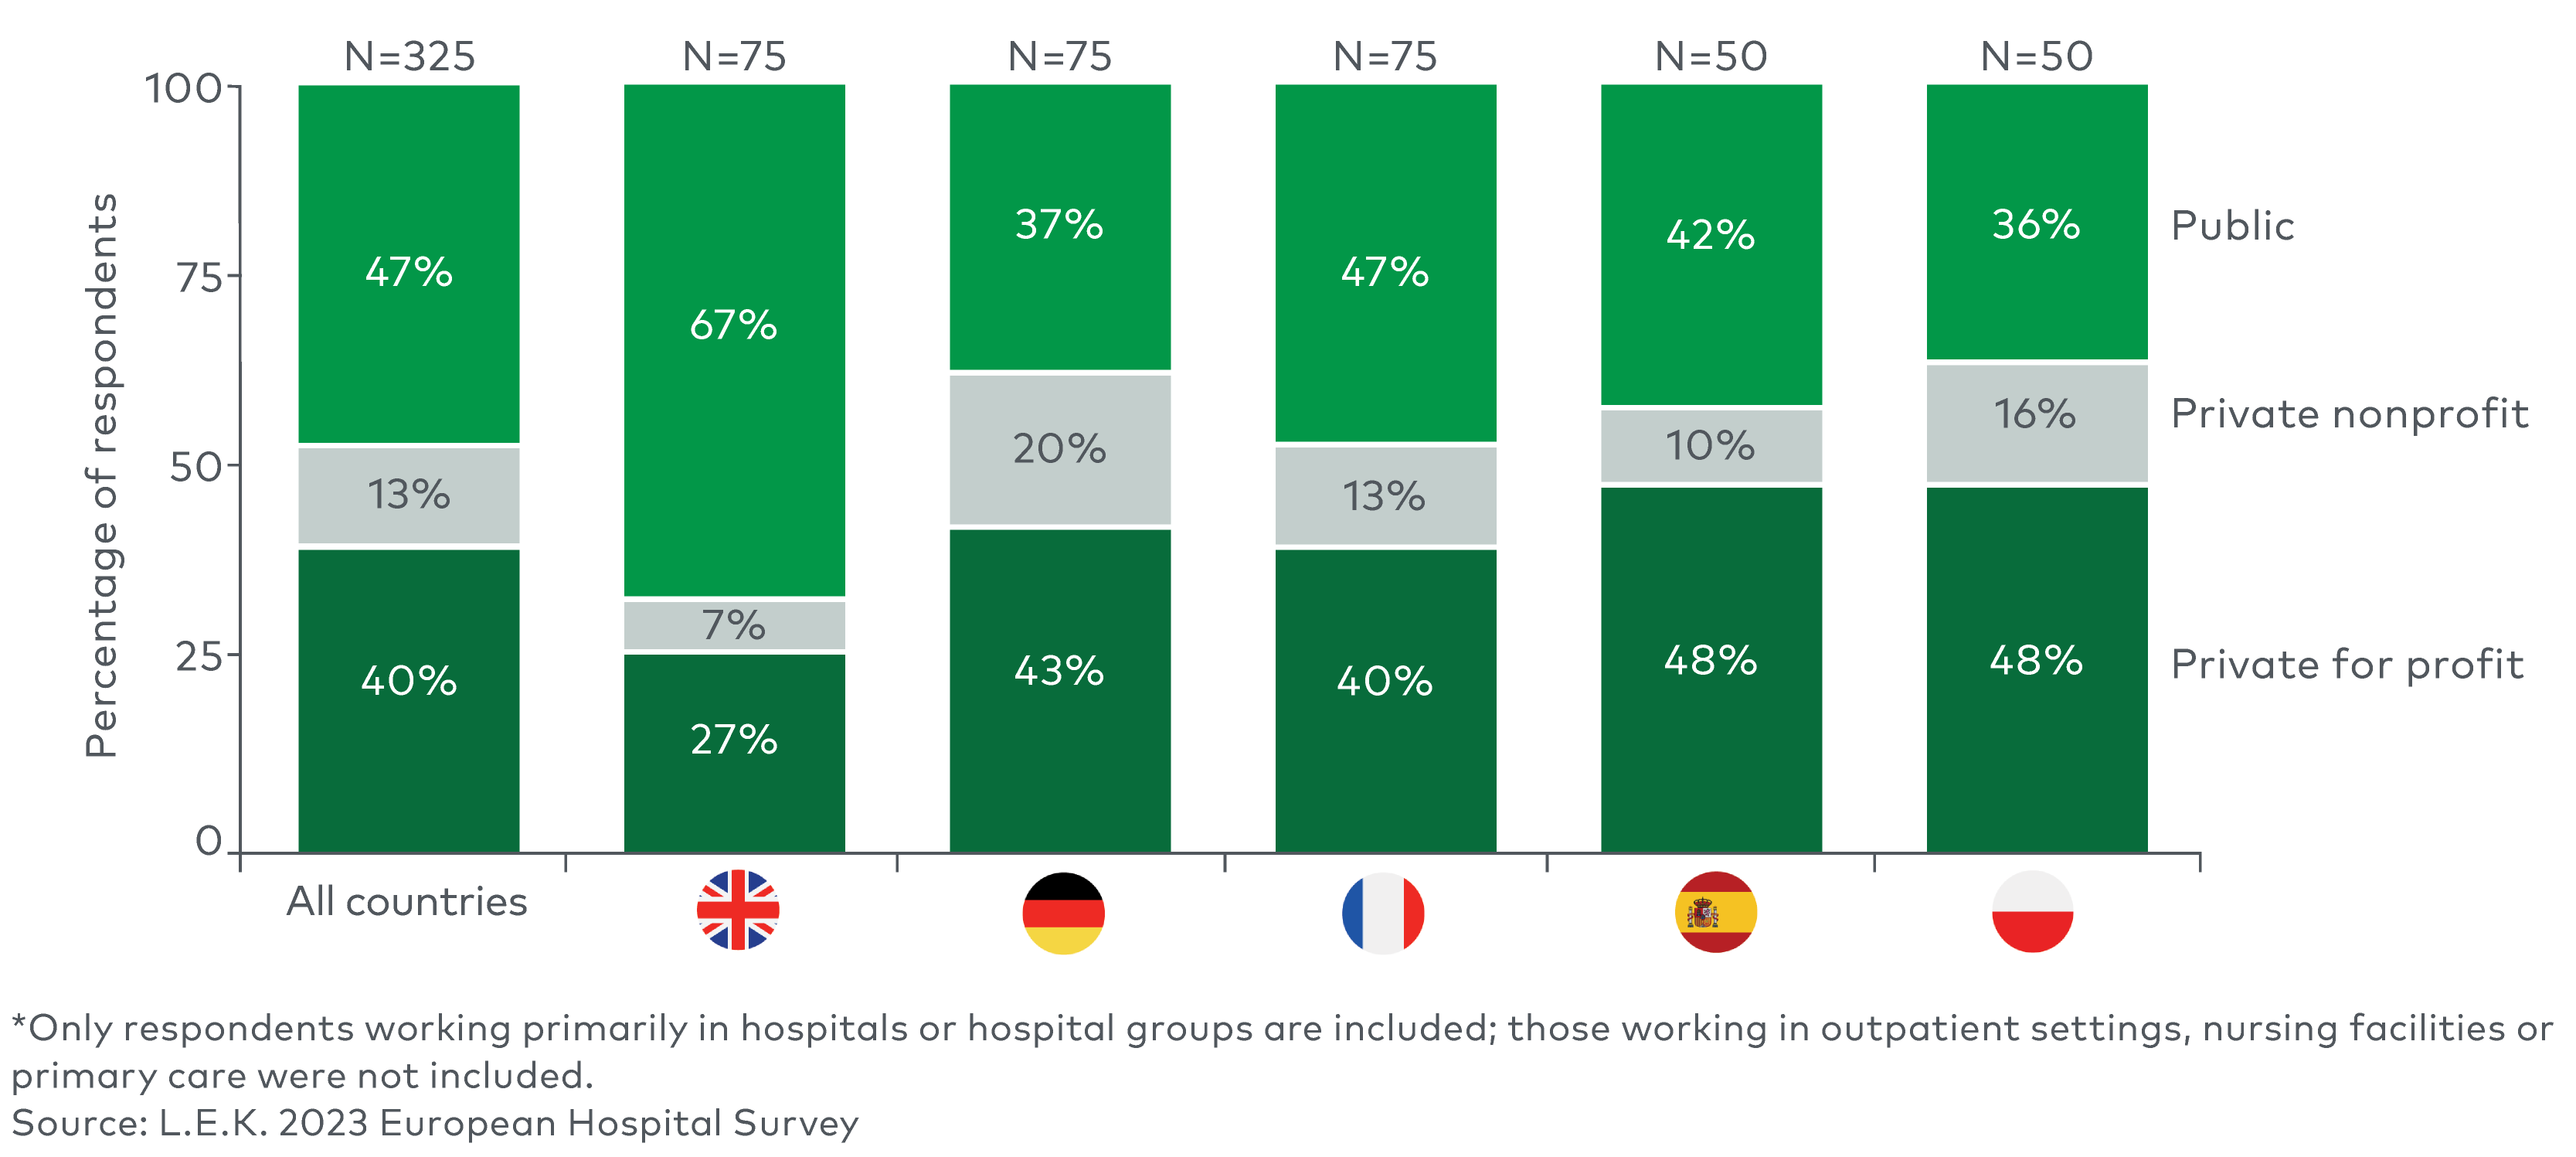 Respondent hospital ownership model mix by country* 